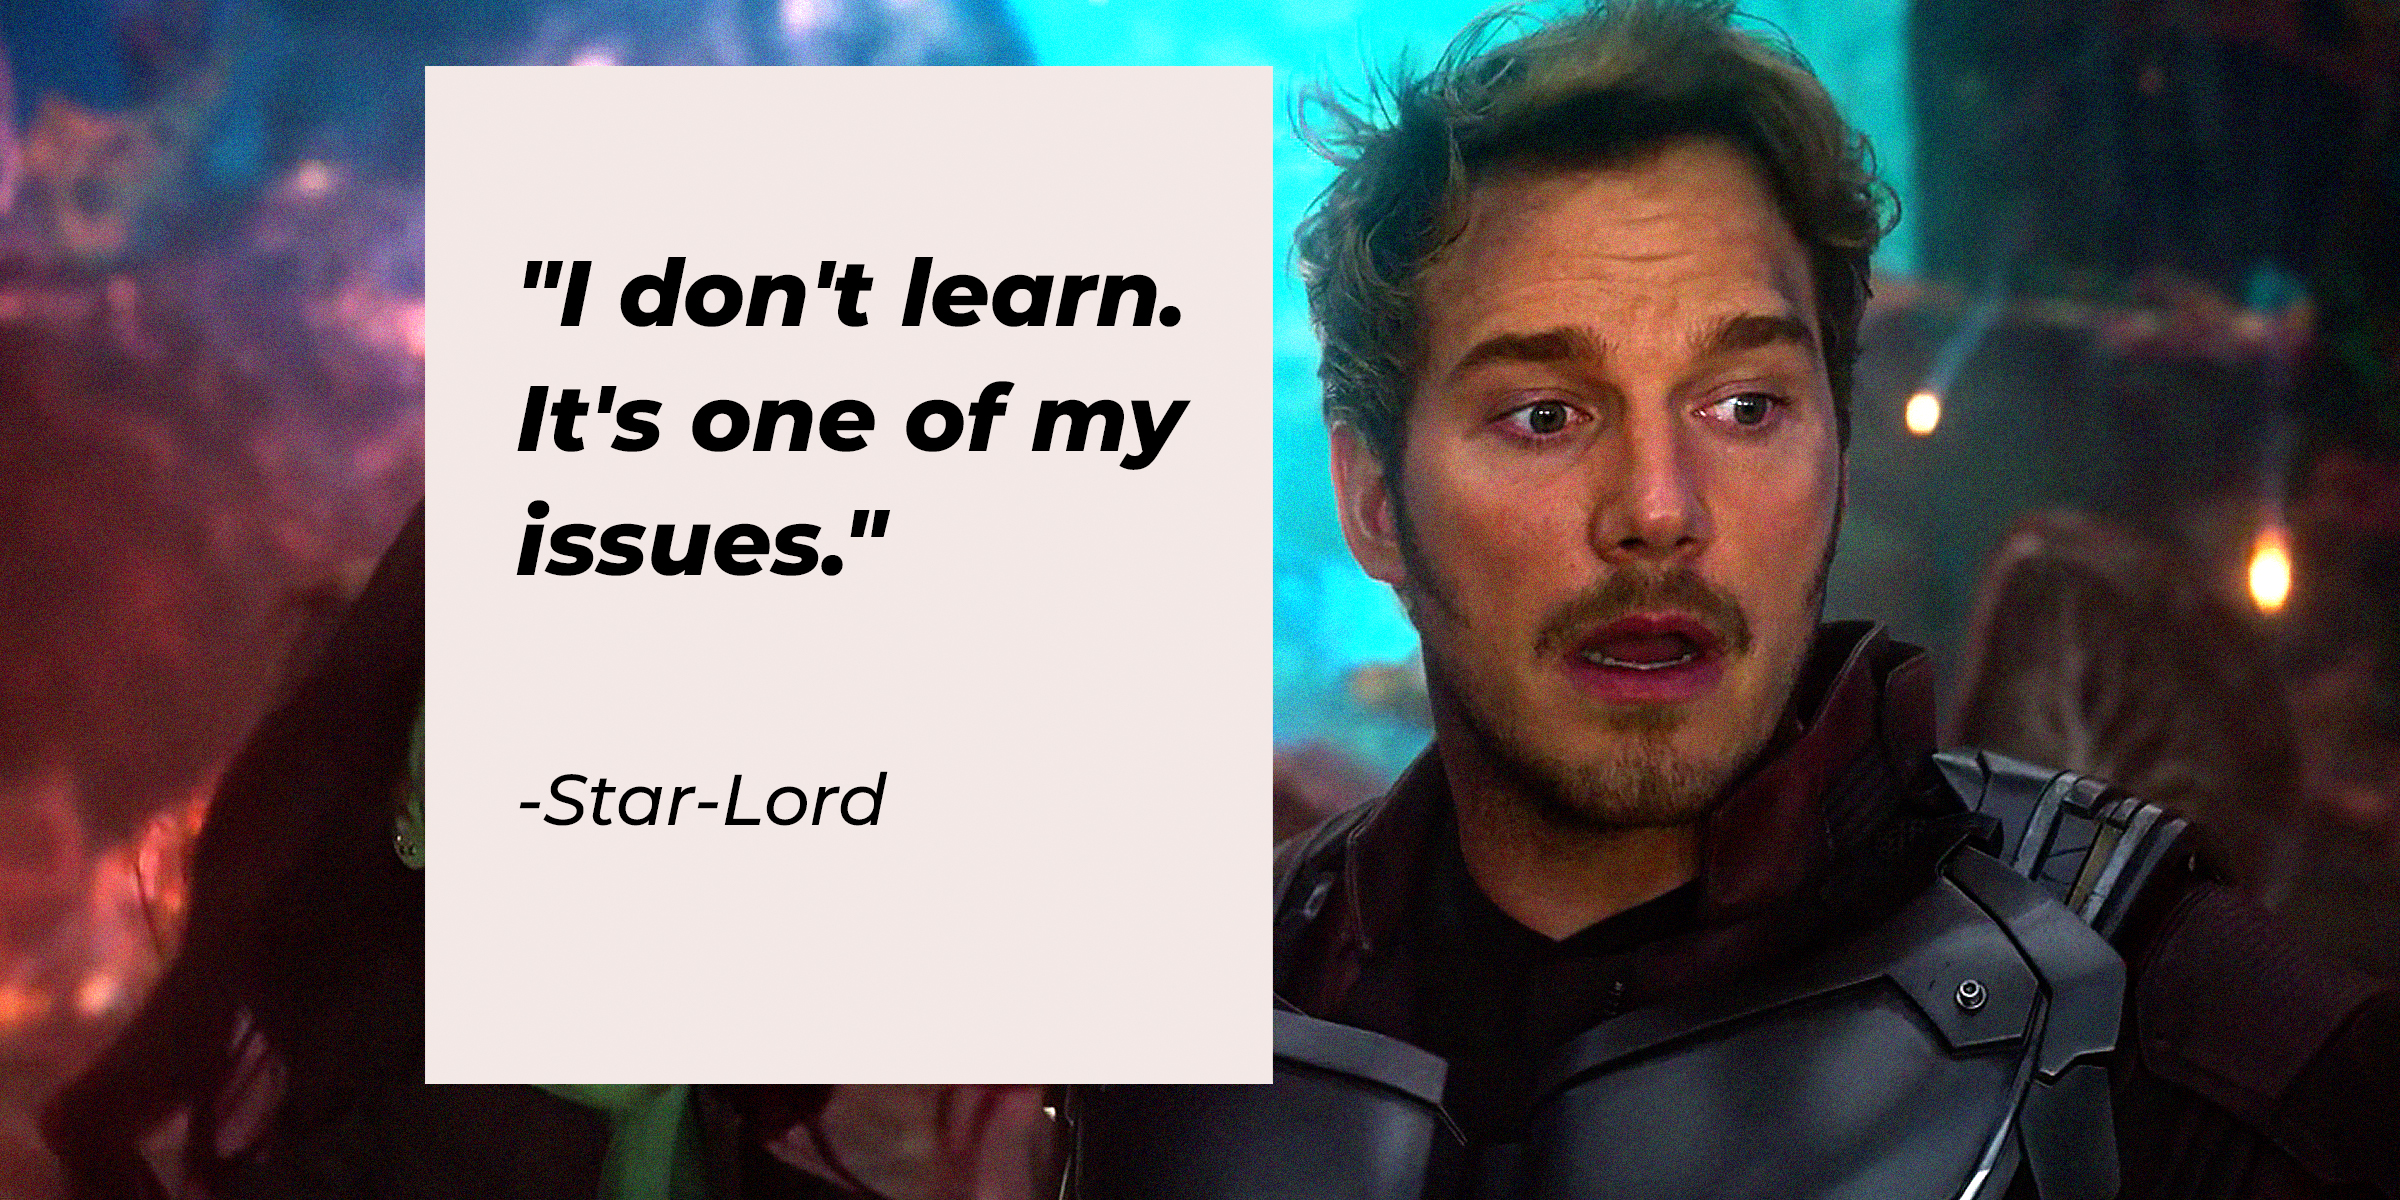 A Photo of Star-Lord with His Quote, "I don't learn. It's one of my issues." | Source: Facebook/guardiansofthegalaxy